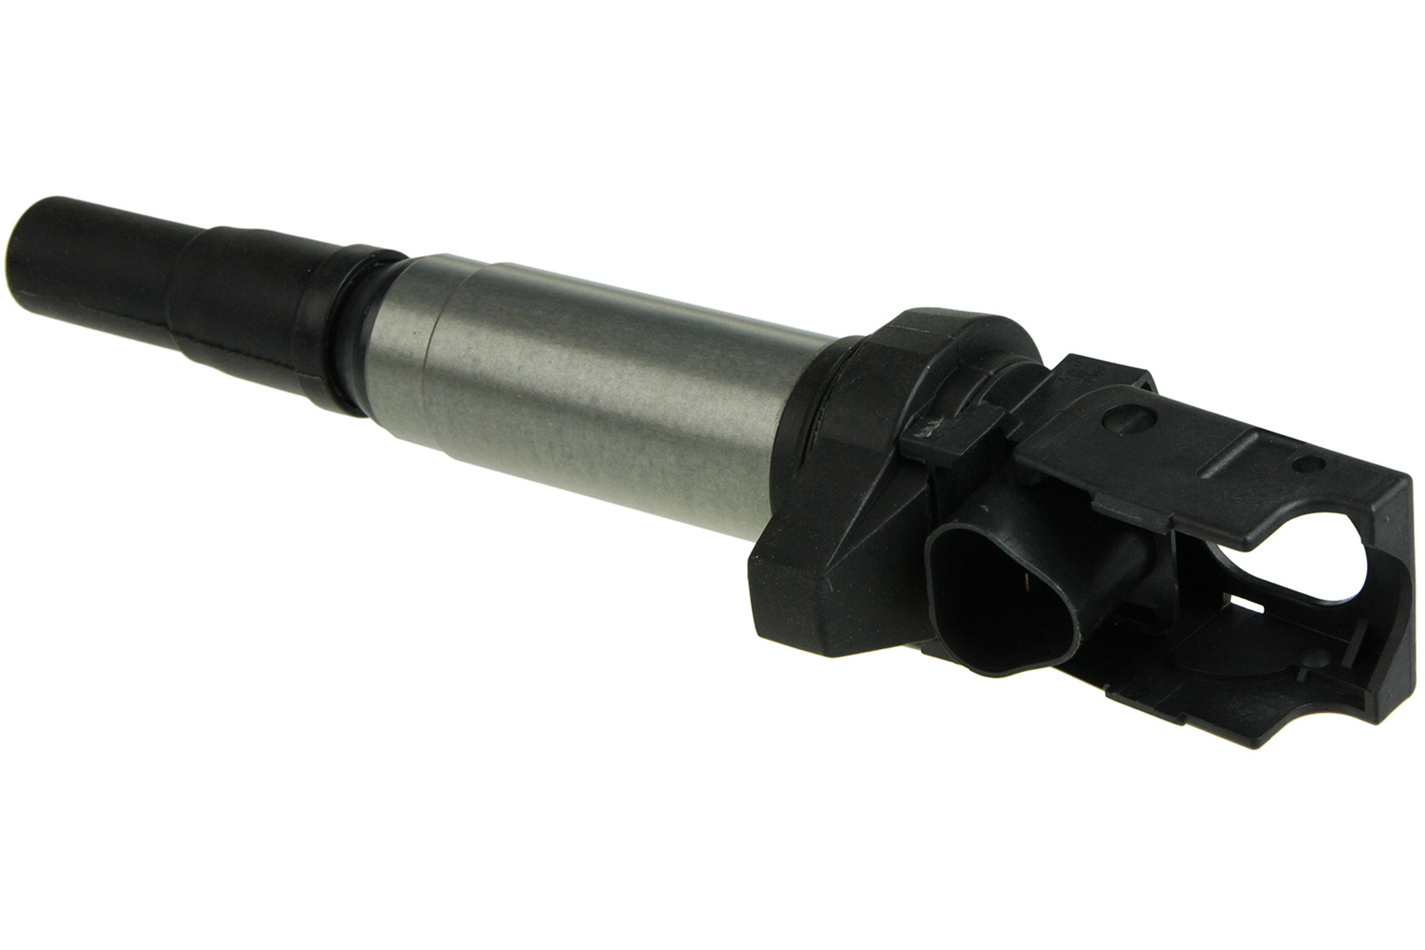 NGK COP Ignition Coil Stock # 48705